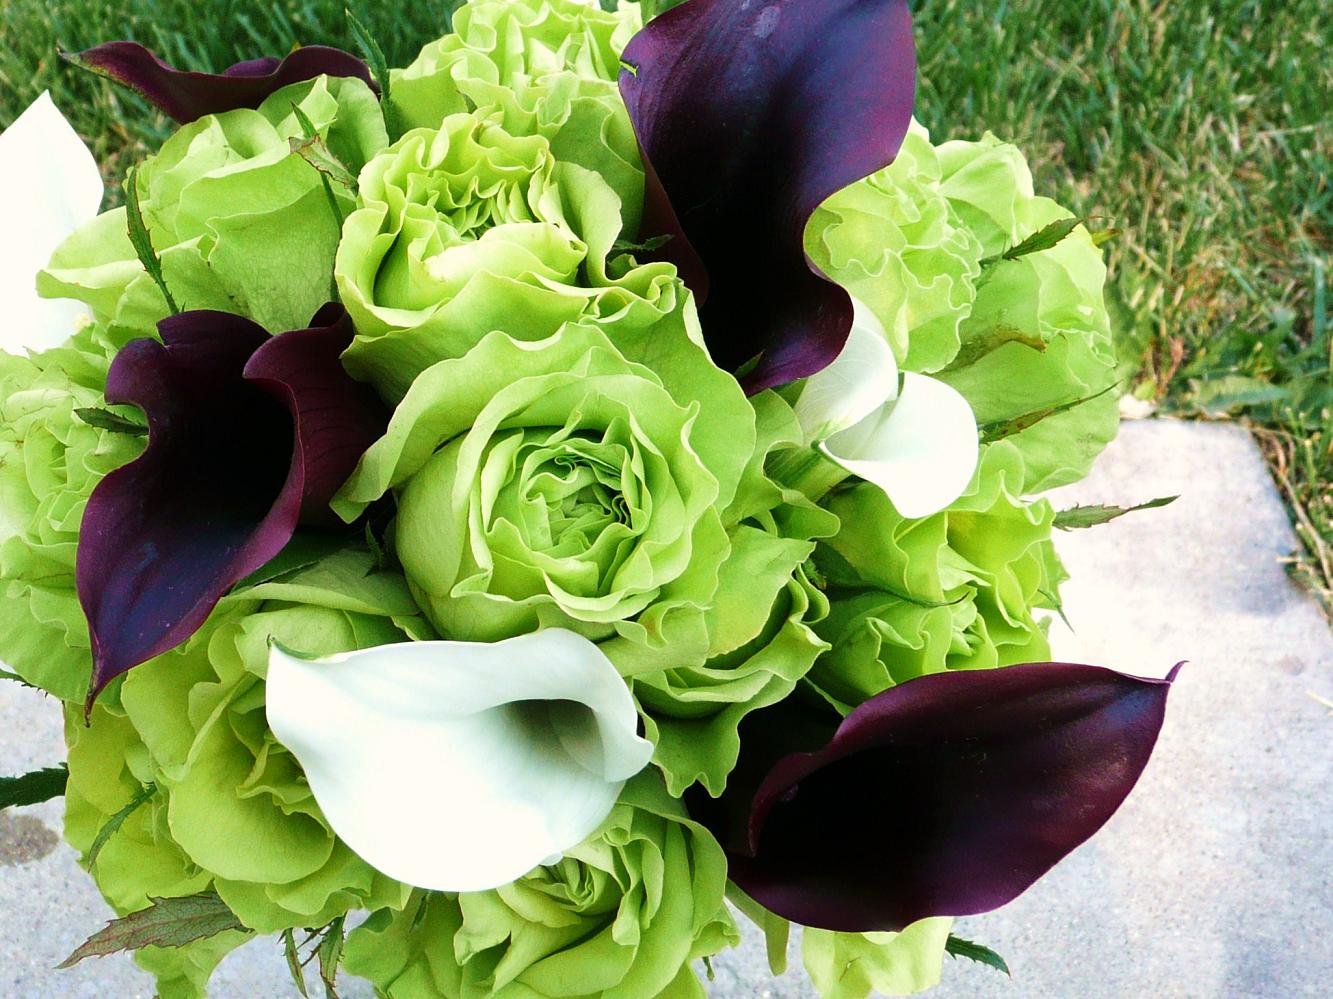 Allinallwalls : Most beautiful green roses in the world ...